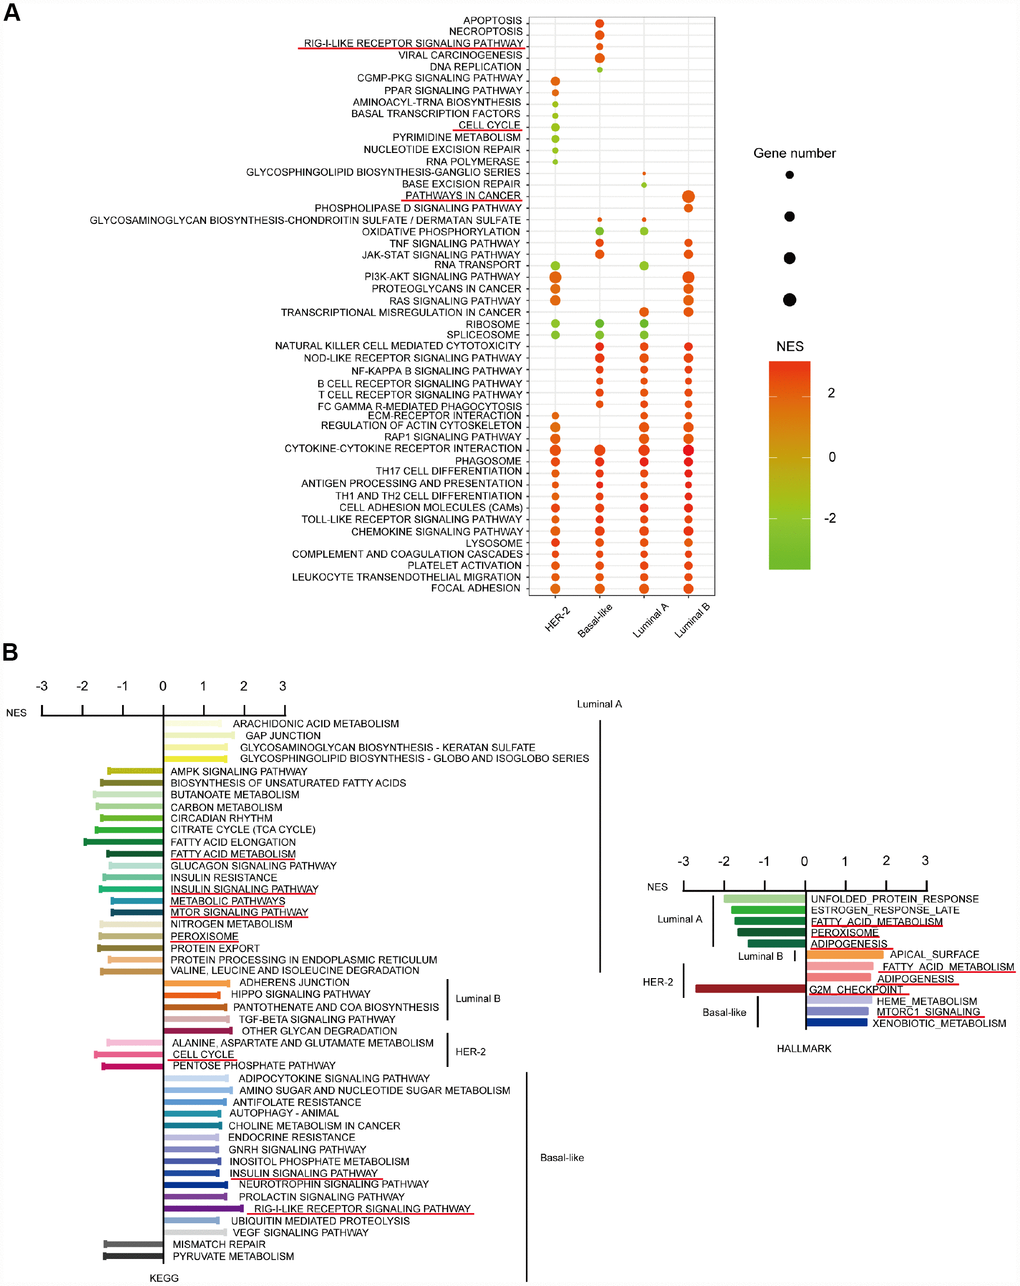 CD204-related special KEGG and HALLMARK pathways for the four subtypes of breast cancer. Top 30 gene sets and corresponding KEGG pathways influenced by CD204 between four subtypes using NES score and gene number screening (A). Special pathways in each subtypes (B).